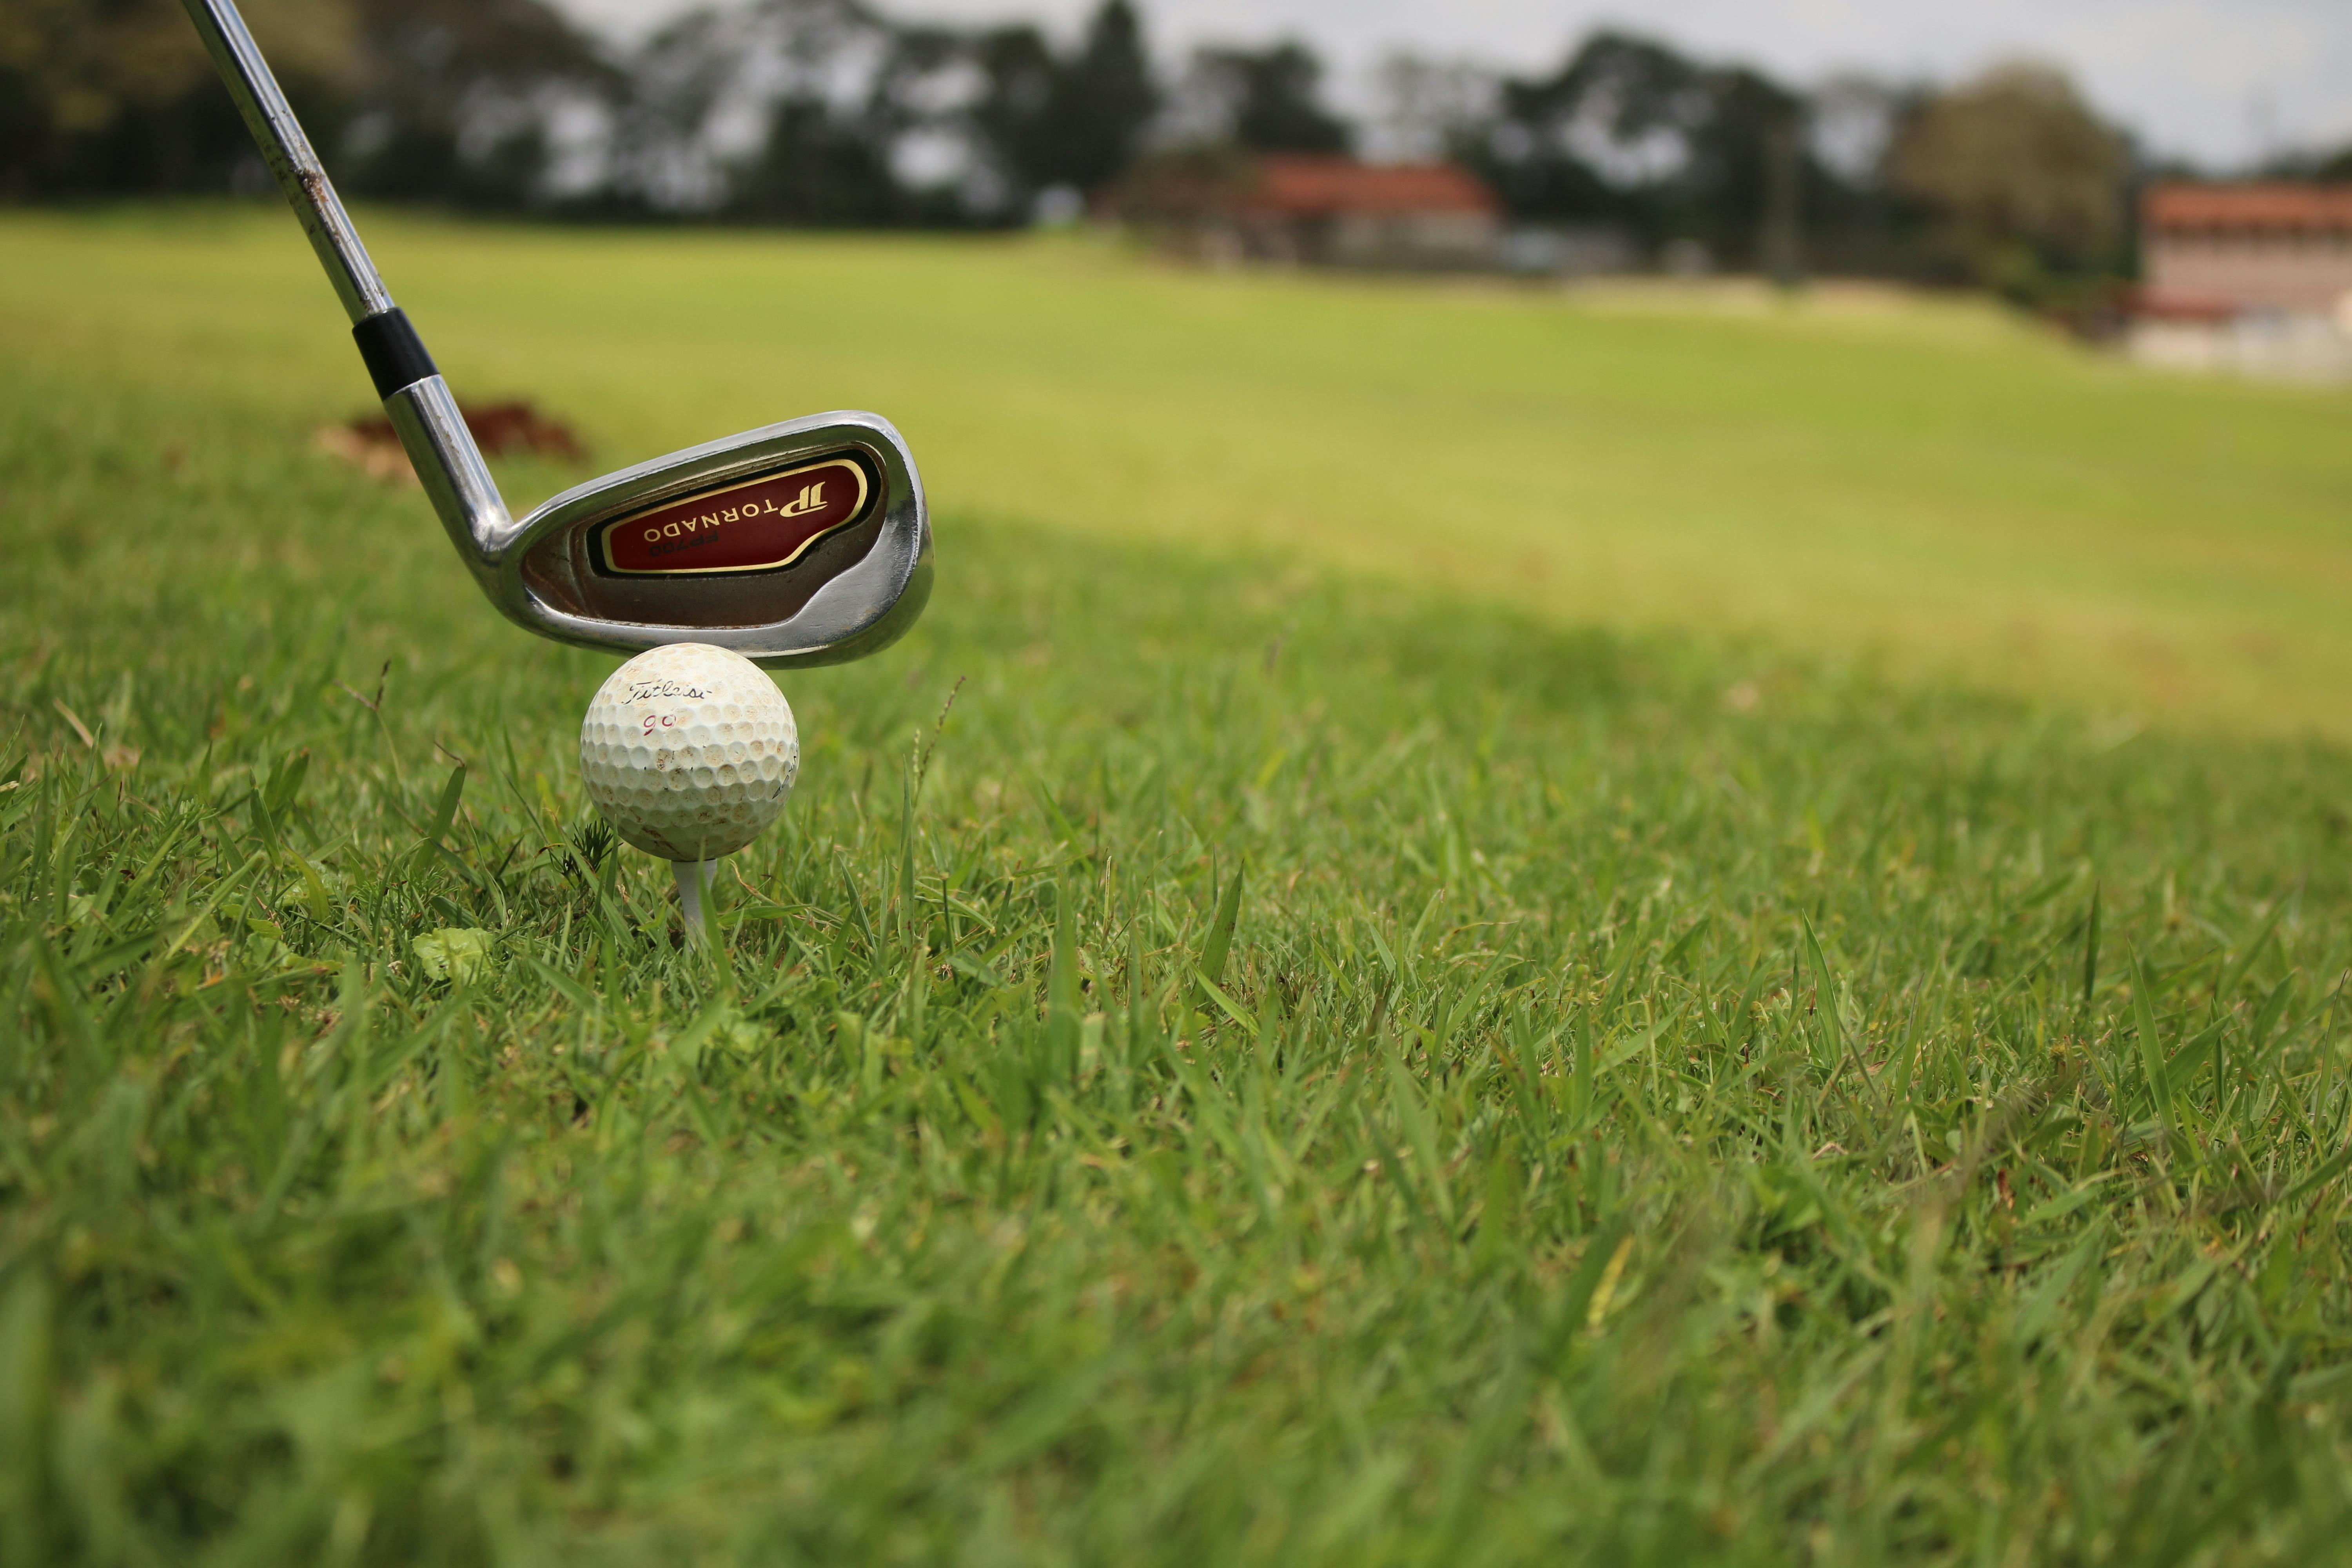 Free stock photo of Golf ball and club